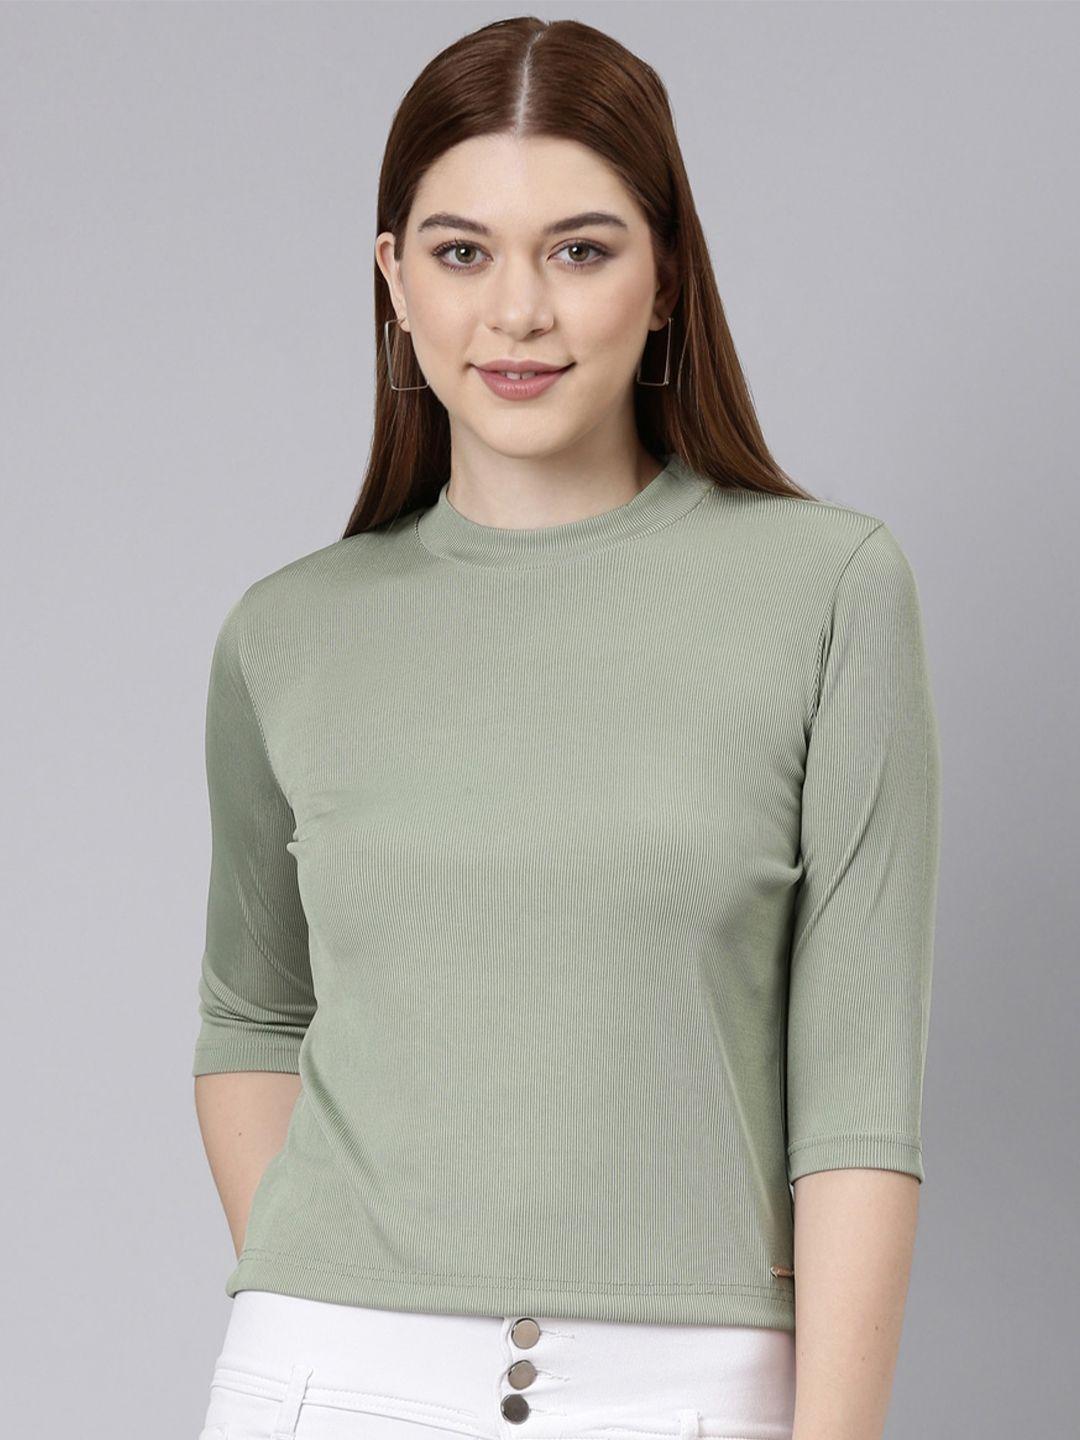 twin birds high neck ribbed fitted top